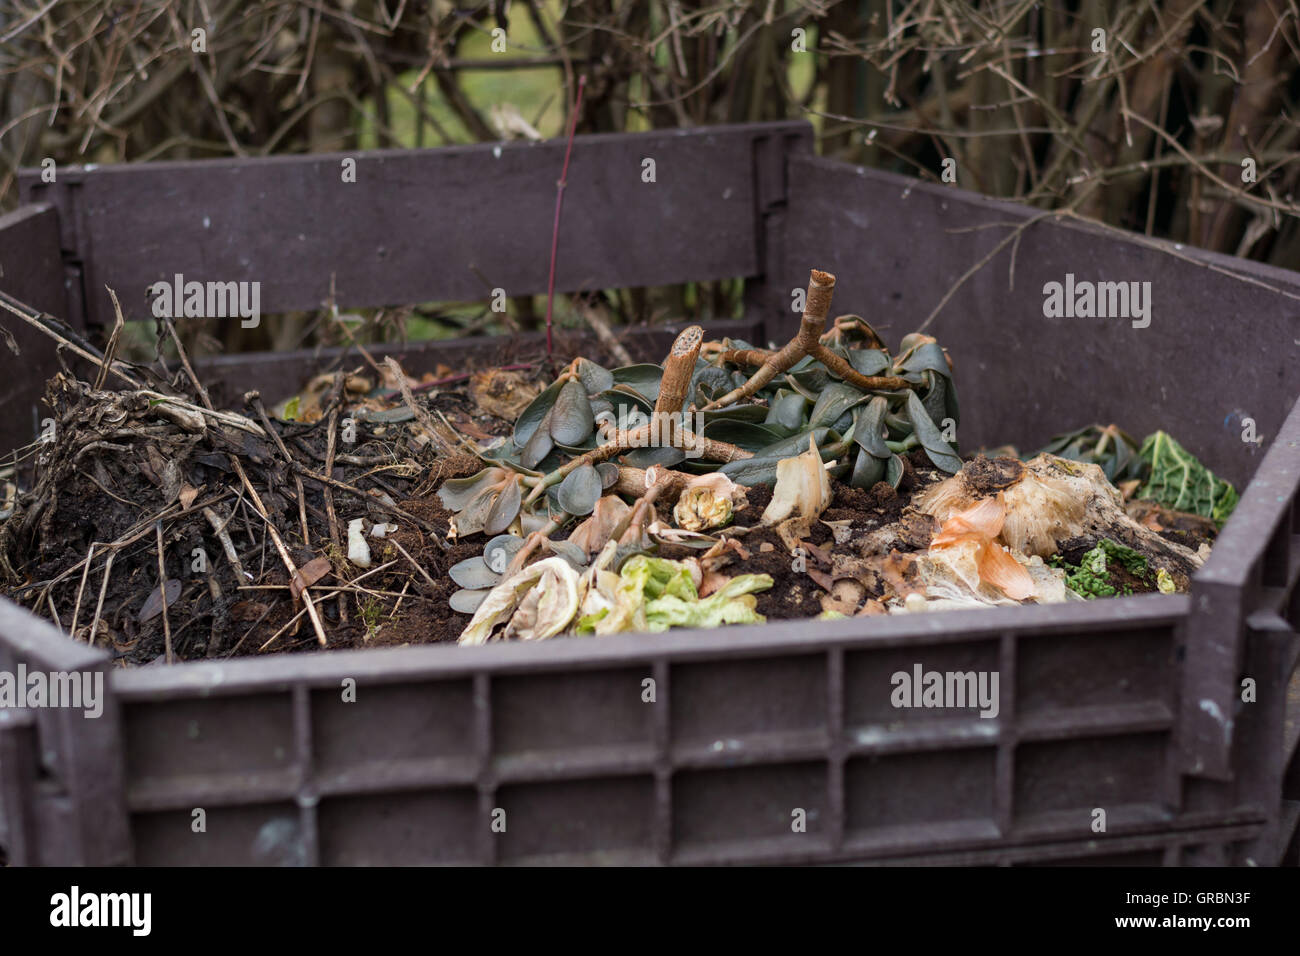 bac a compost Stock Photo